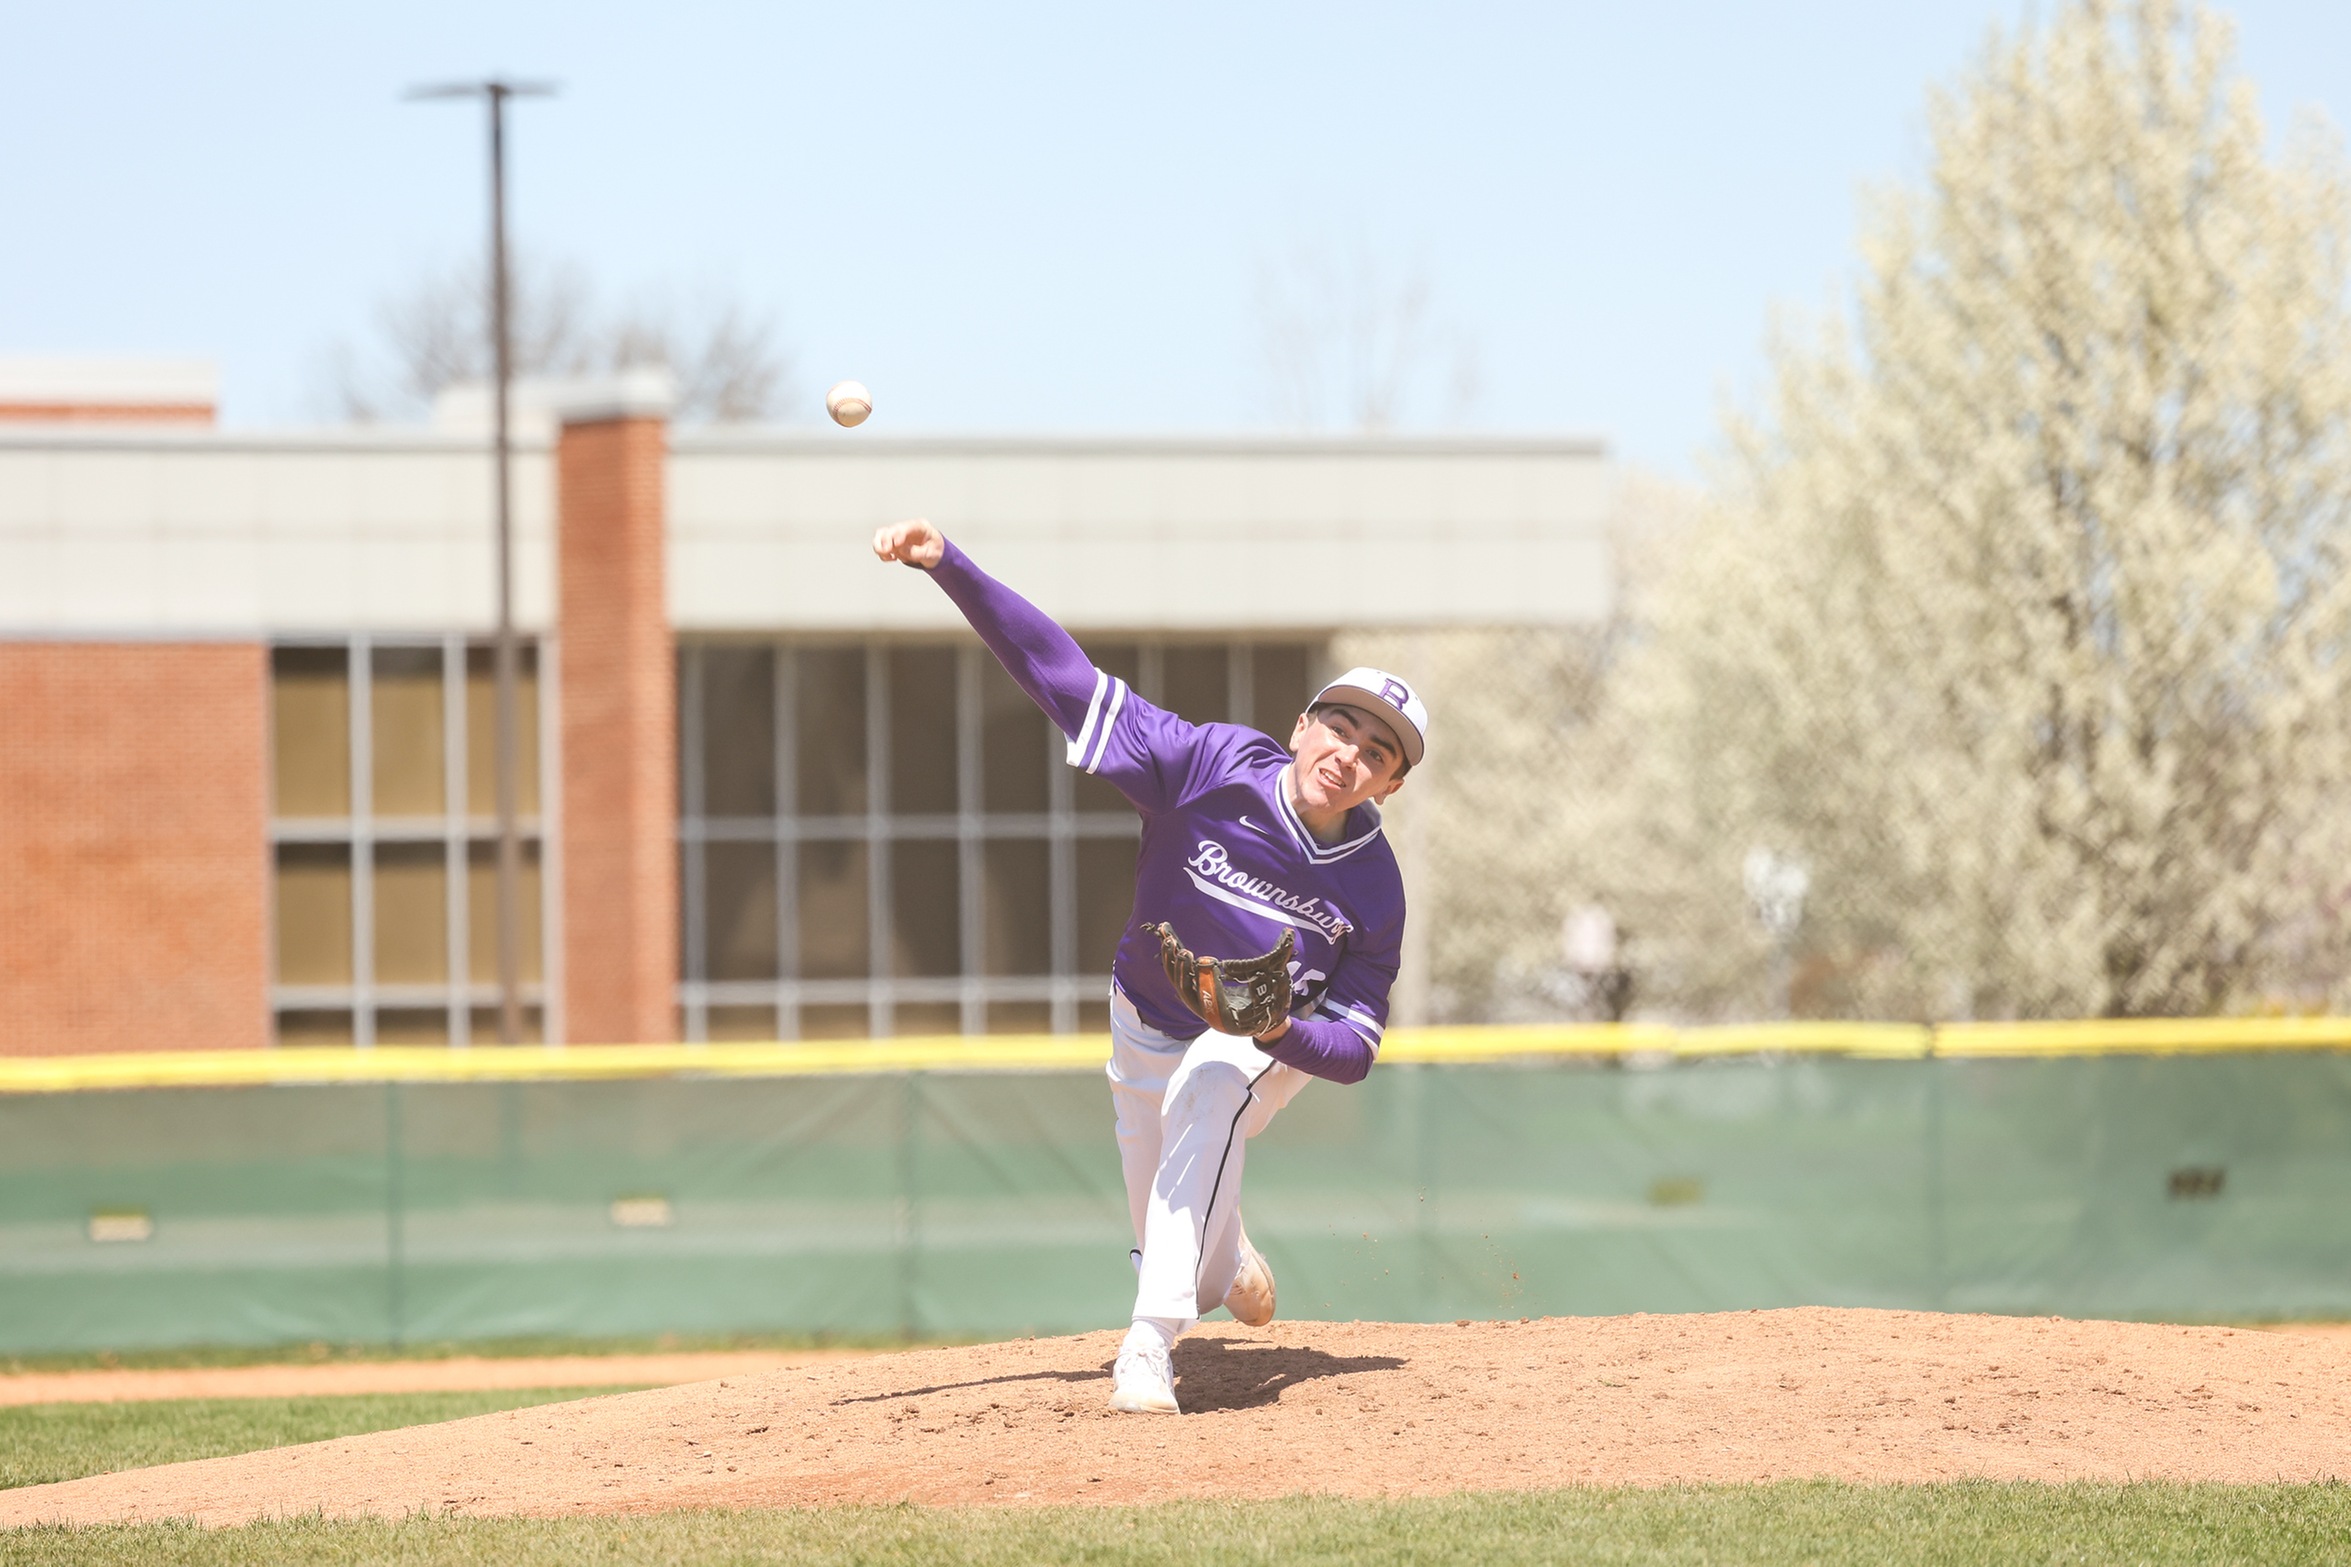 Baseball Falls to Trojans after Early Deficit, 7-11